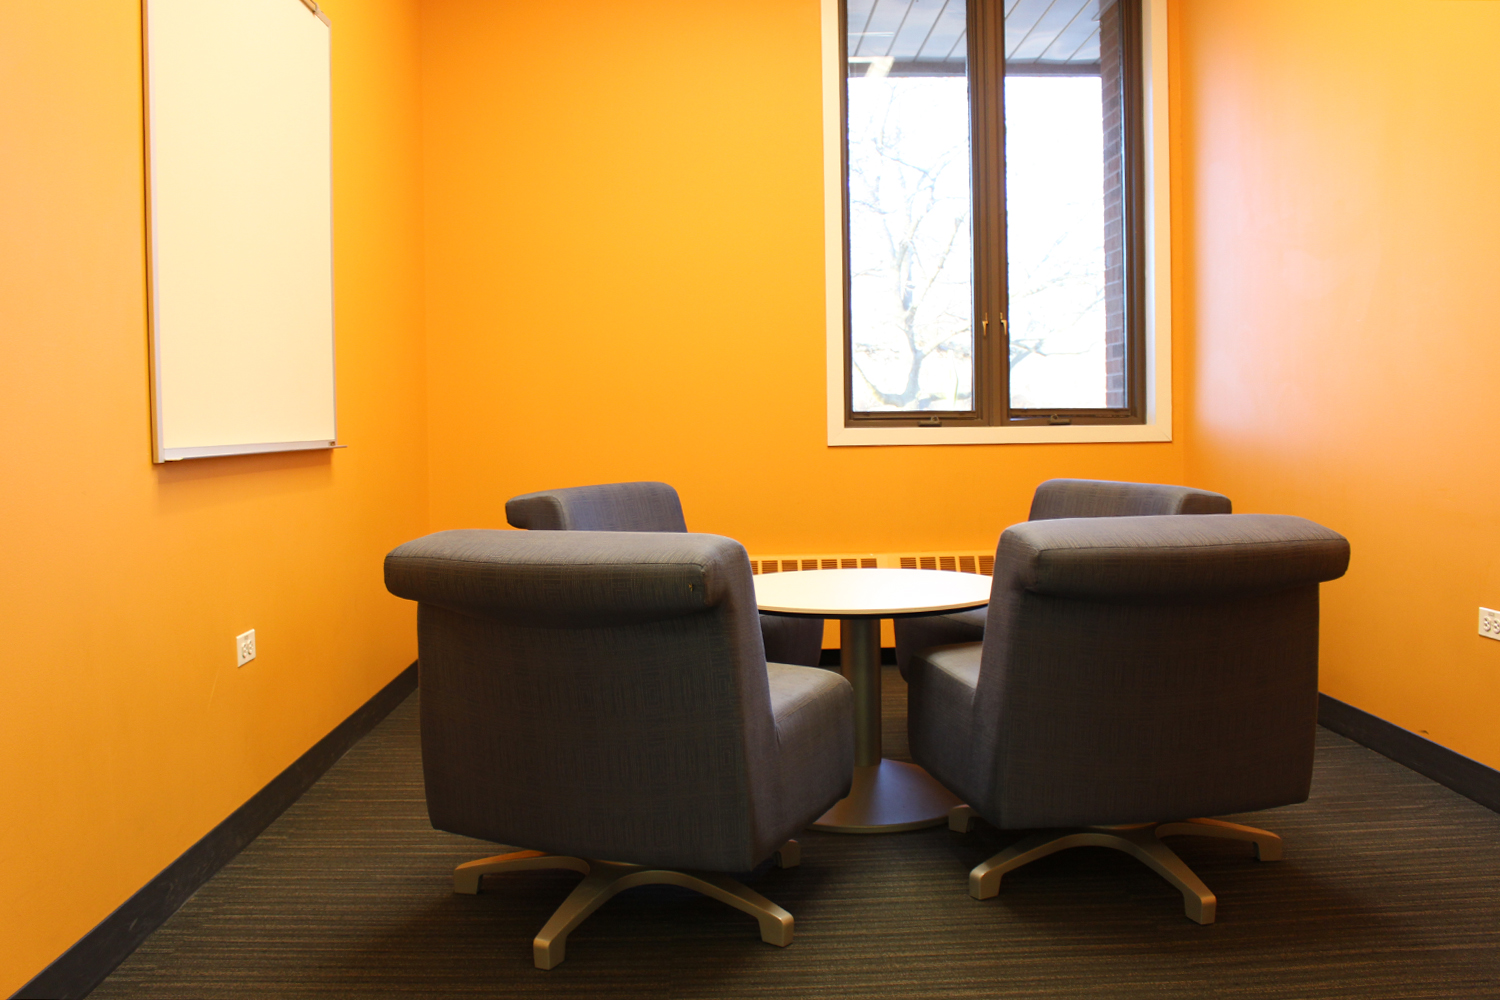 Room with orange walls, low table surrounded by four chair, white board on wall, window facing library parking lot